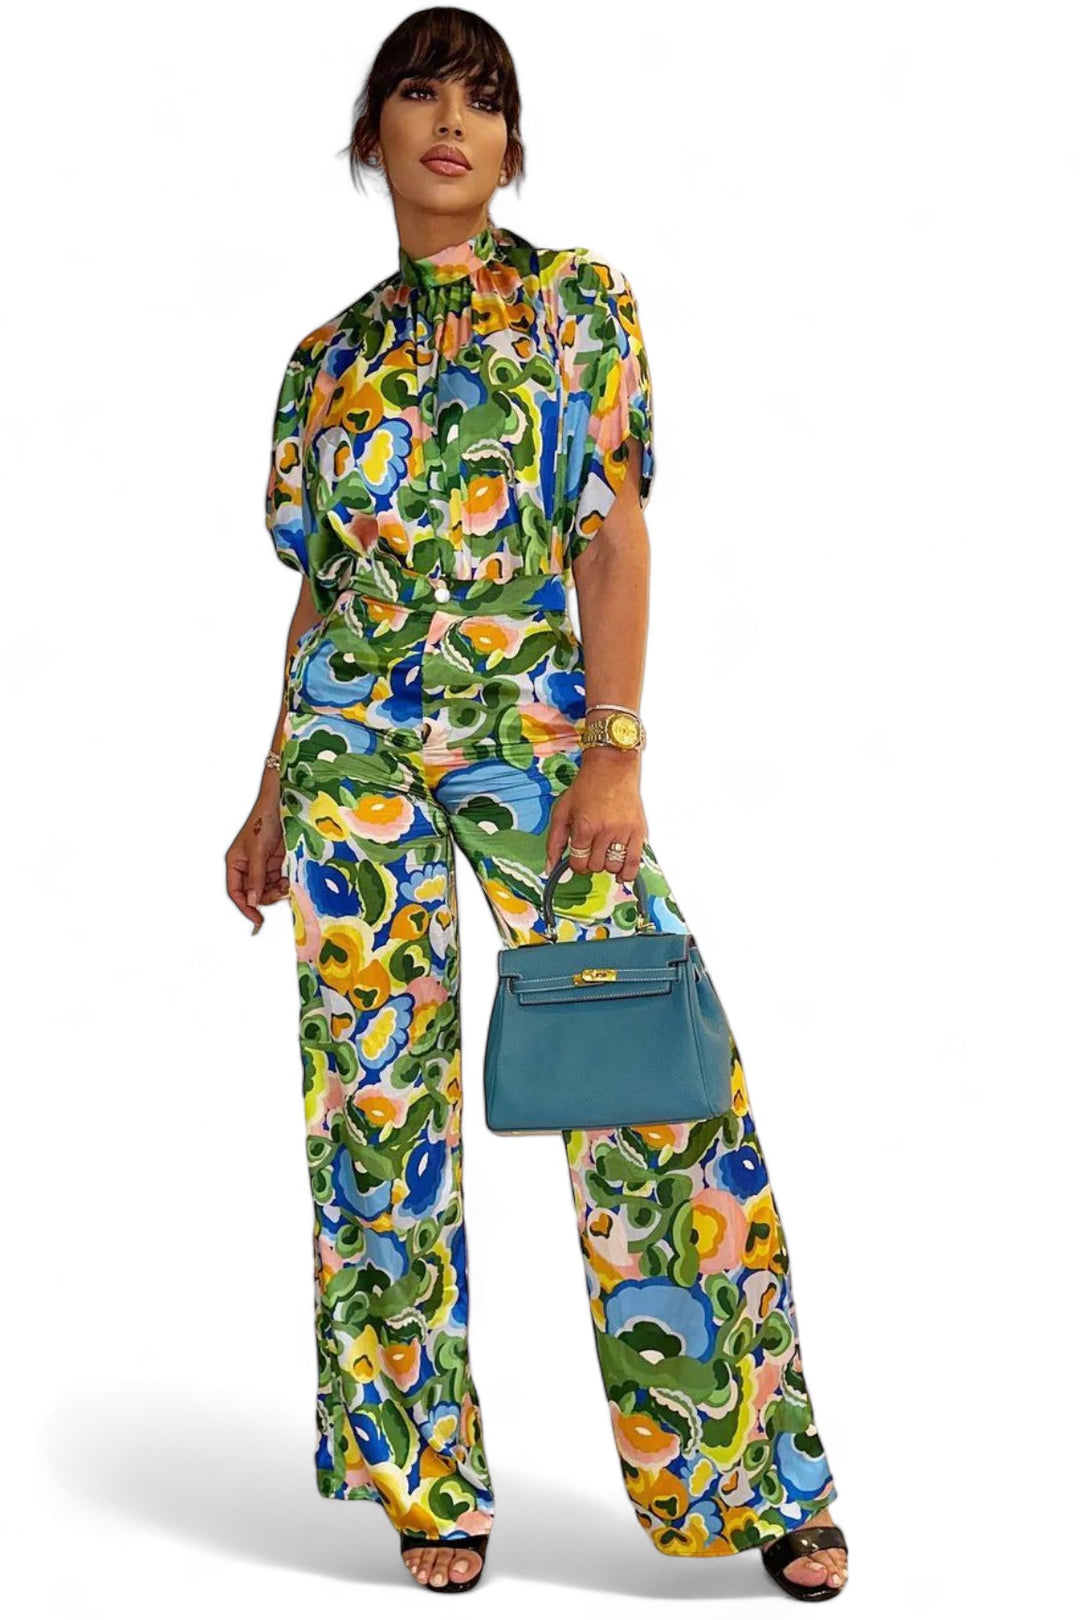 a woman in a colorful outfit holding a blue purse